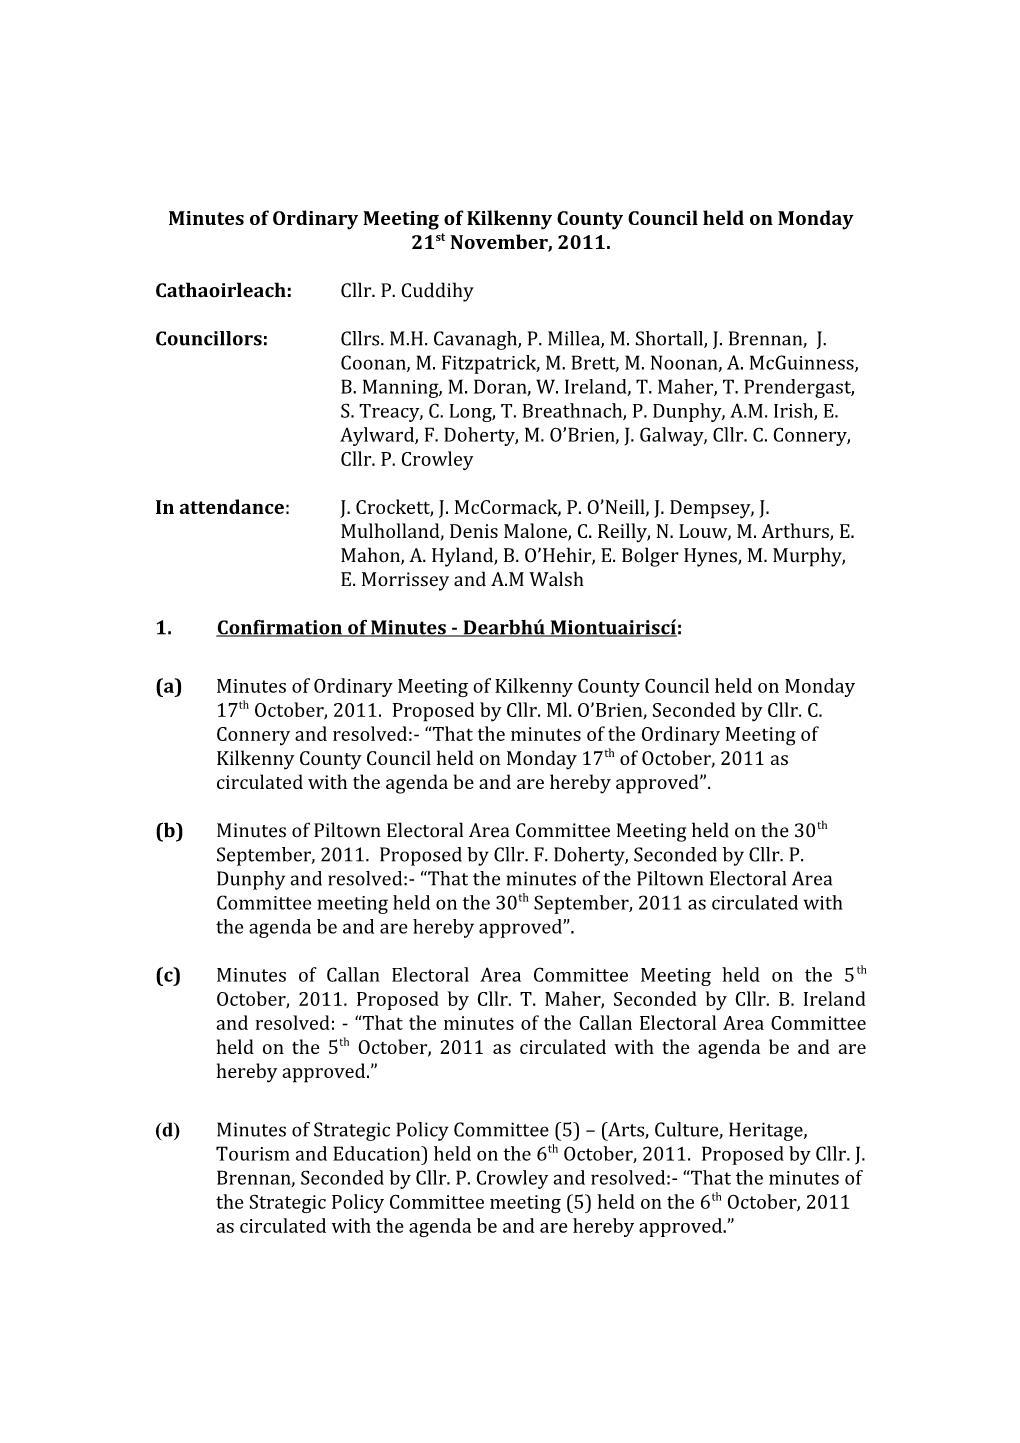 Minutes of Ordinary Meeting of Kilkenny County Council Held on Monday 20Th June, 2011